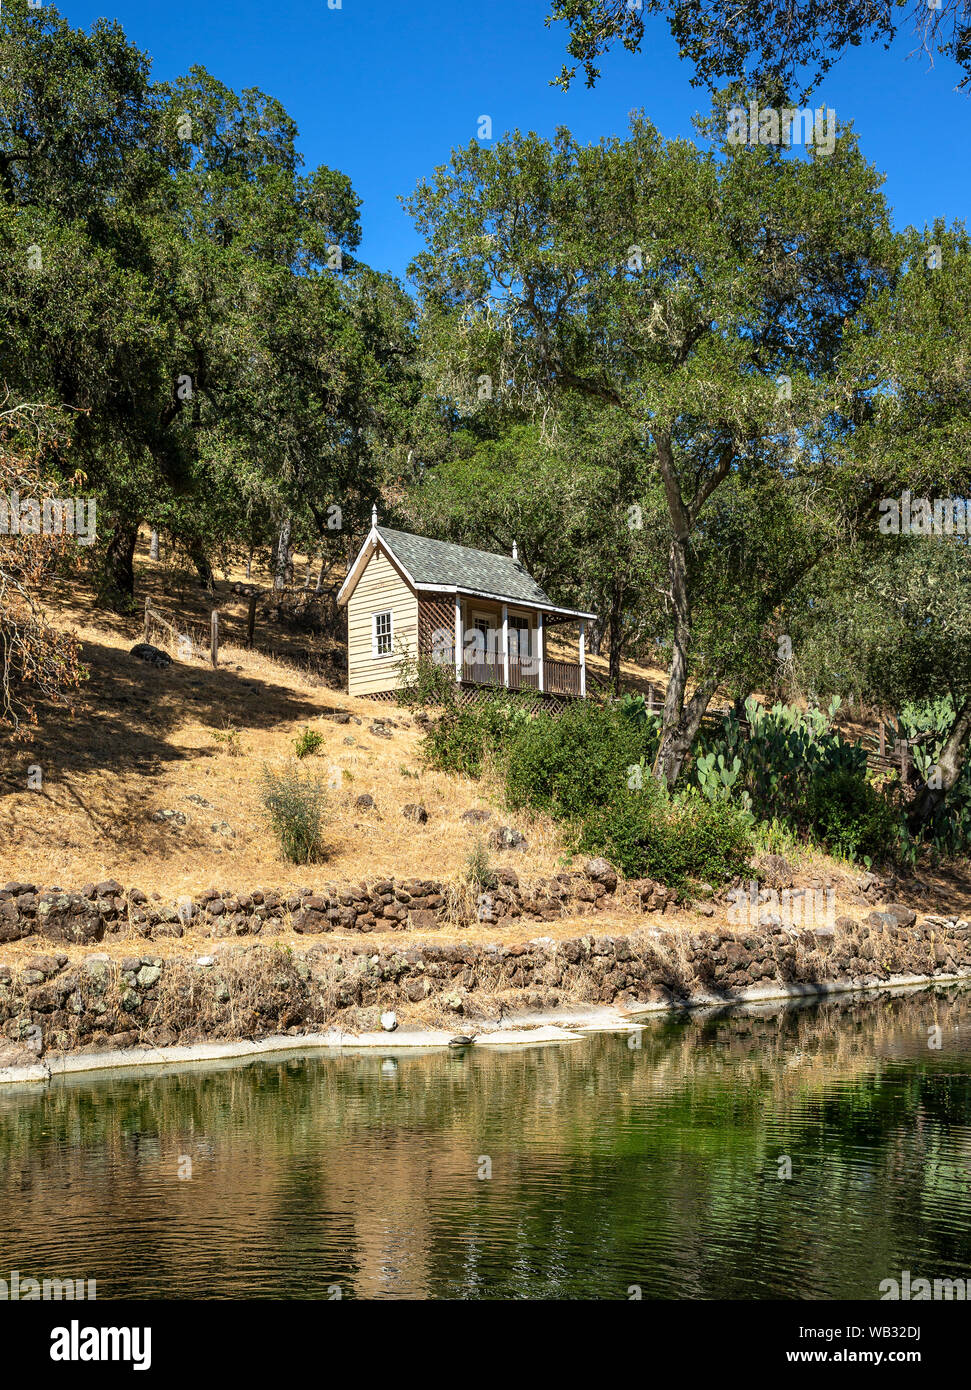 A view of the reservoir and Hermitage or Napoleon’s Cottage at  General Vallejo's Lachryma Montis Estate in Sonoma. The cottage was used by General Va Stock Photo